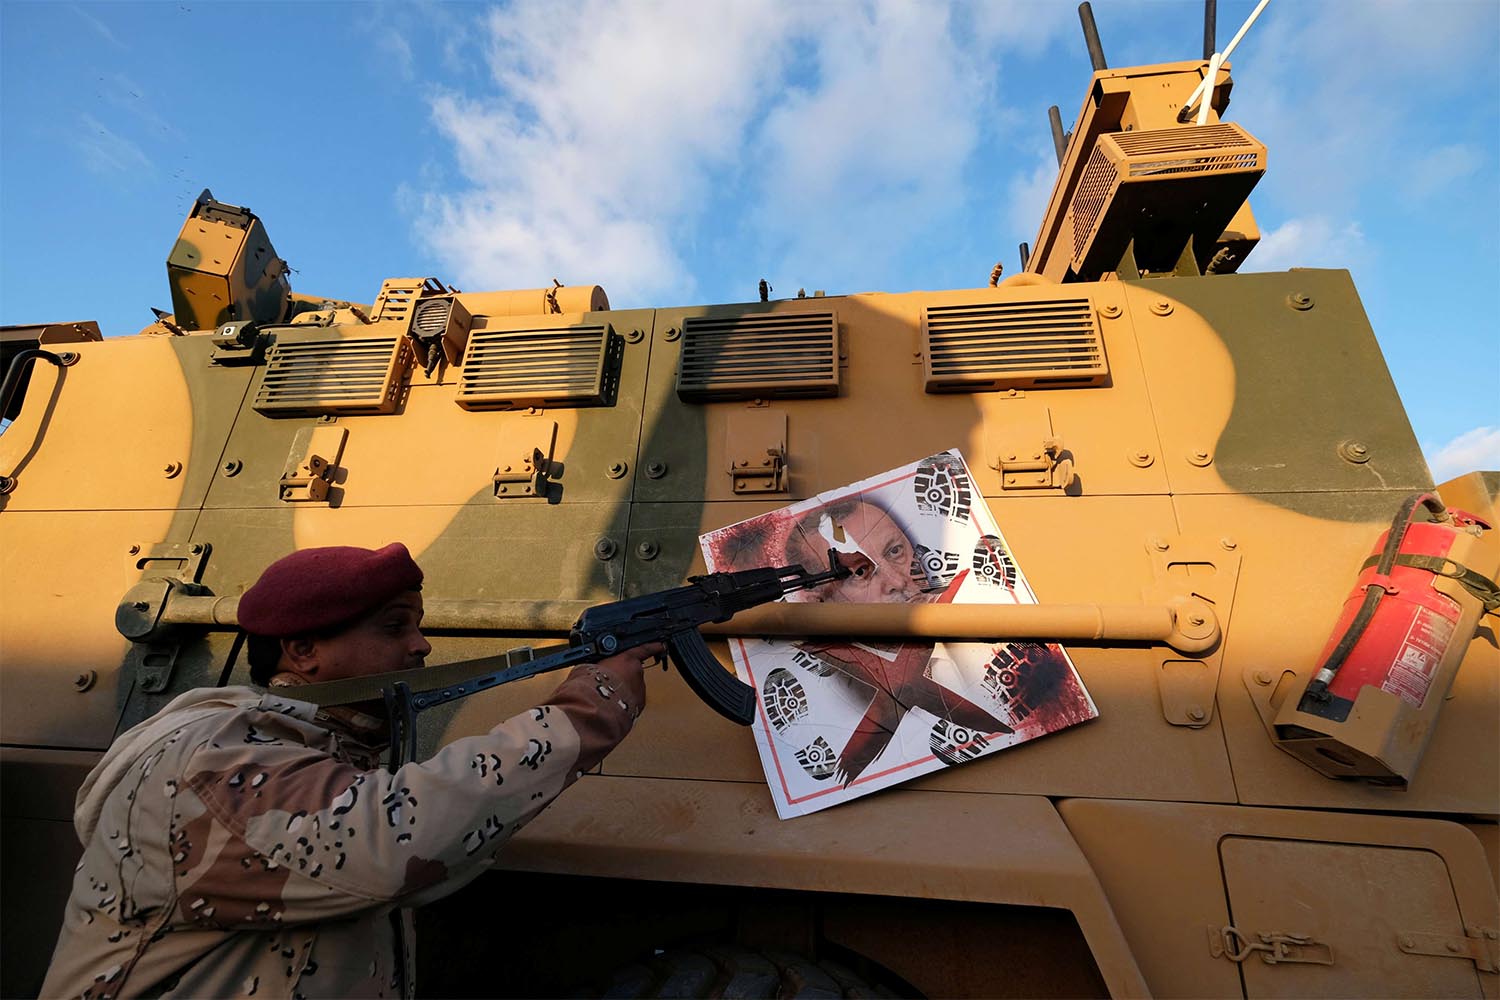 A member of Libyan National Army (LNA) commanded by Khalifa Haftar, points his gun to the image of Turkish President Tayyip Erdogan